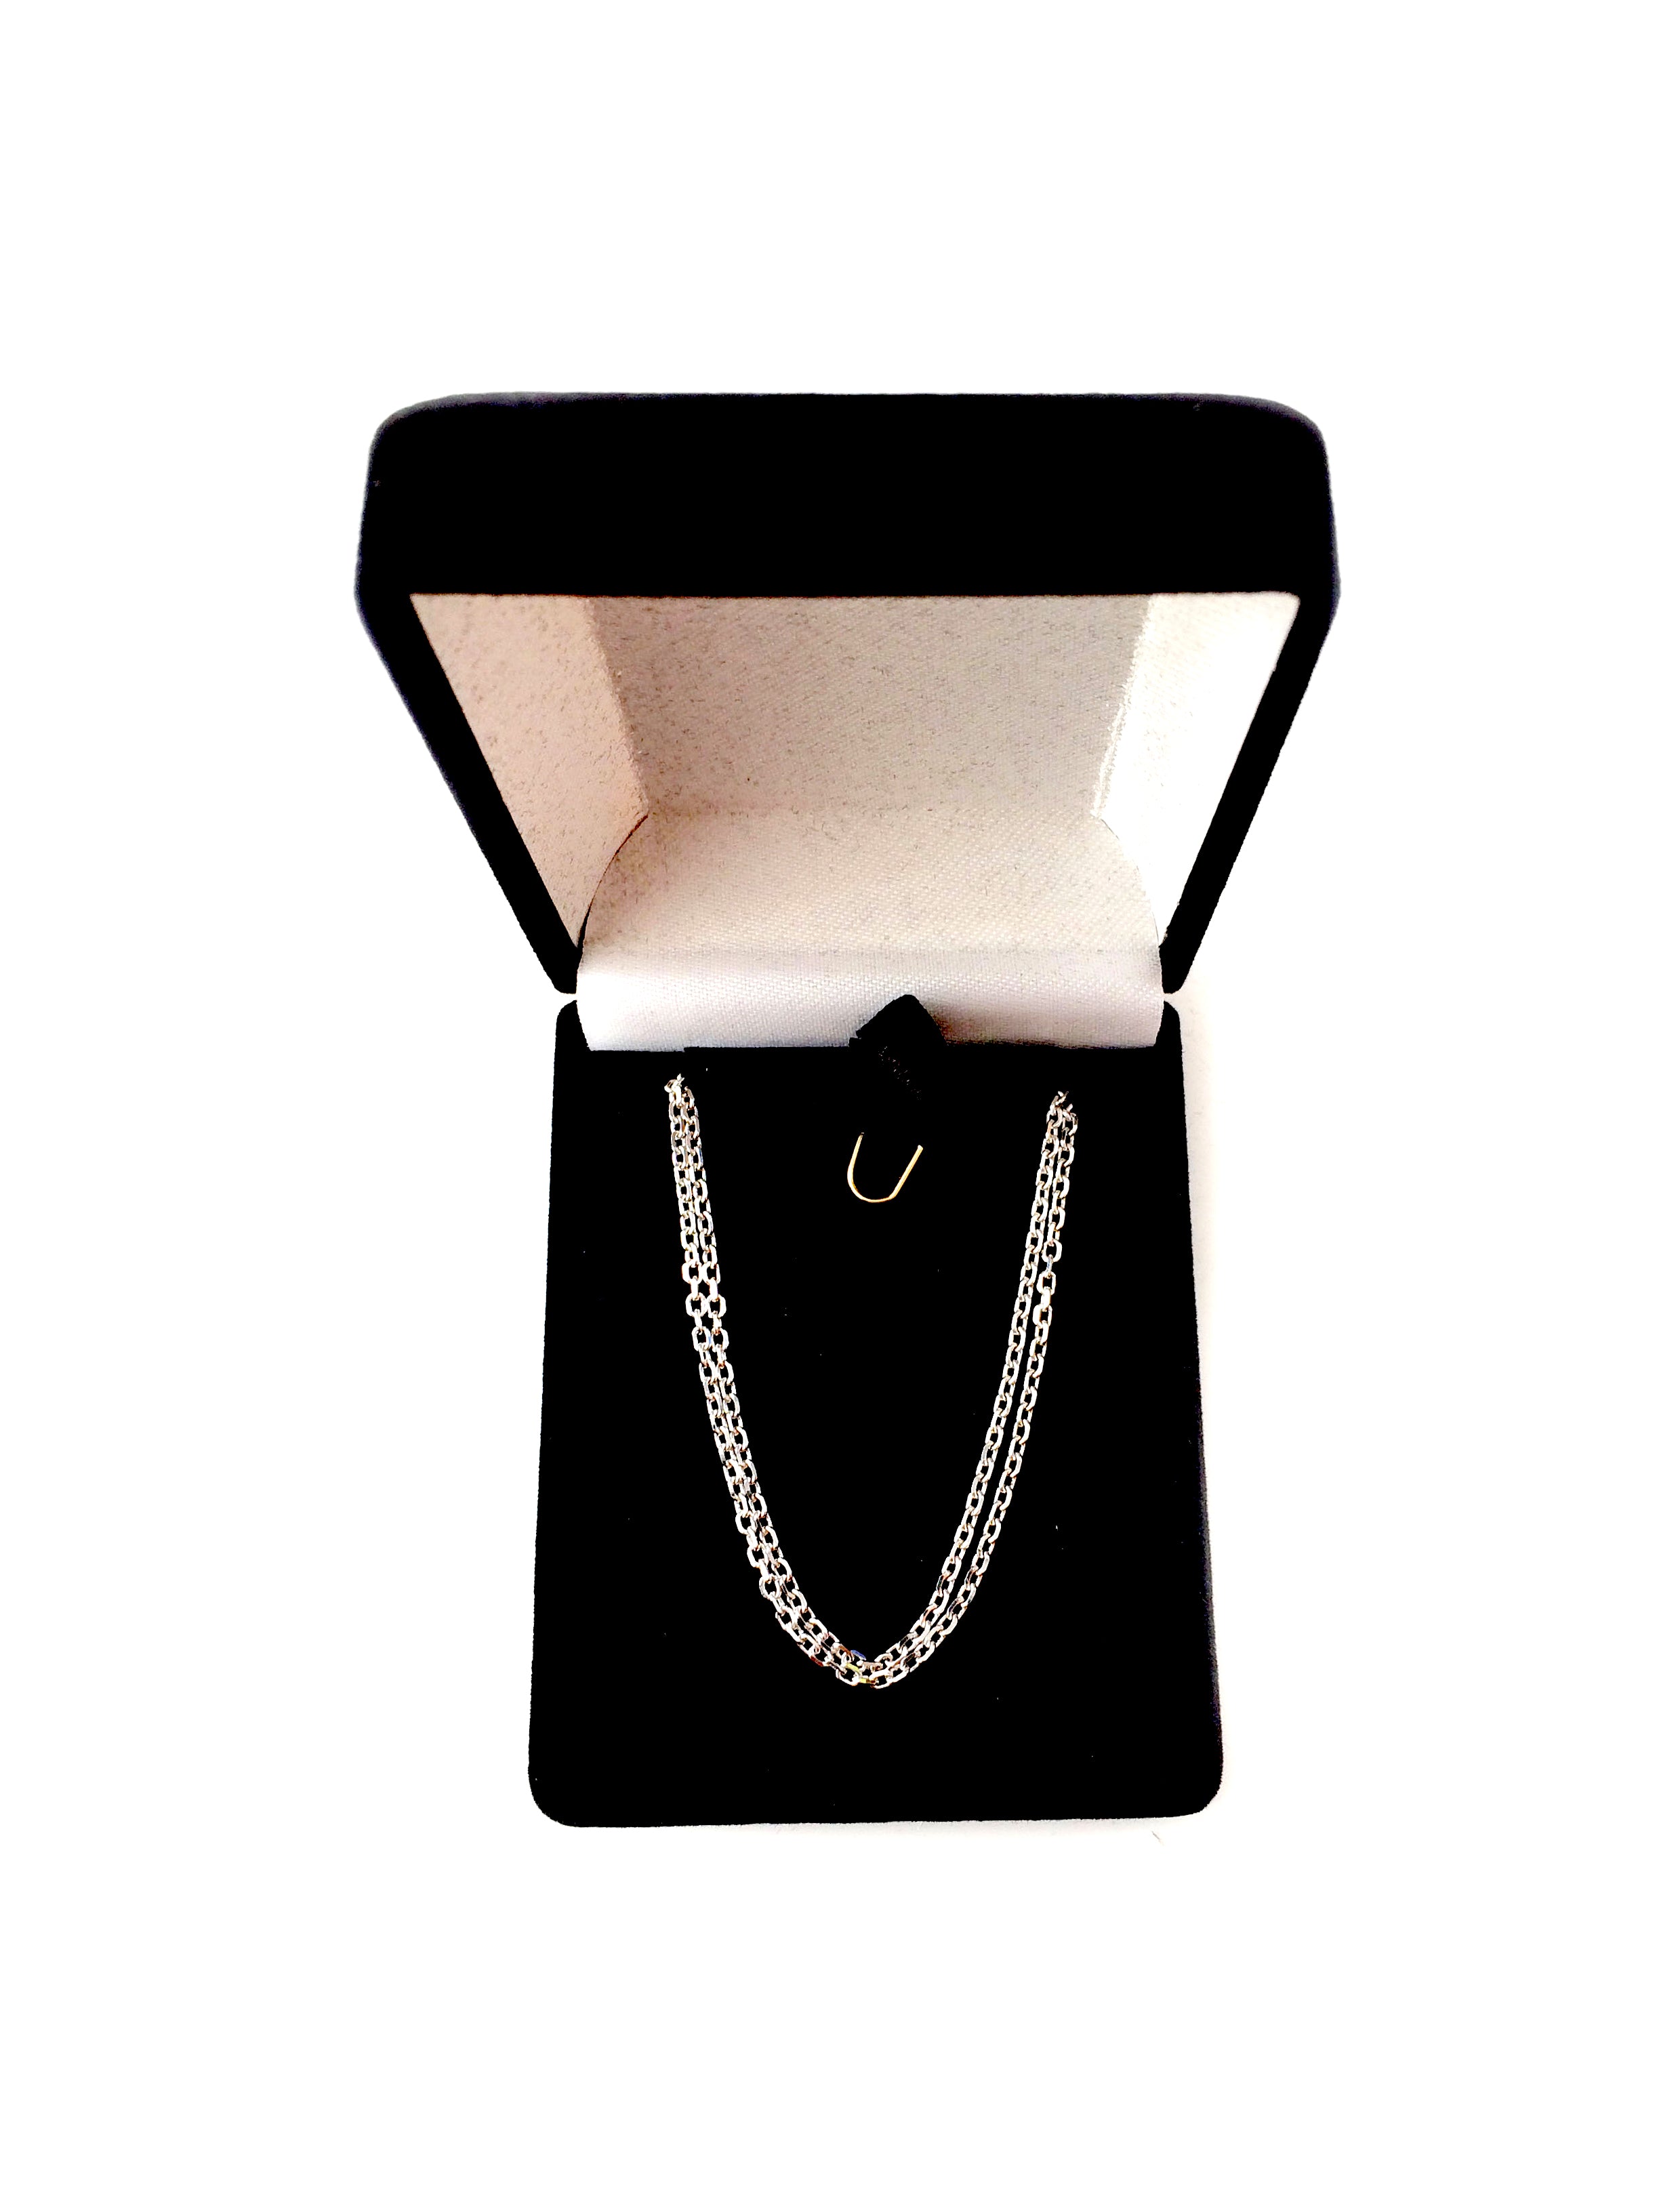 14k White Gold Cable Link Chain Necklace, 1.5mm